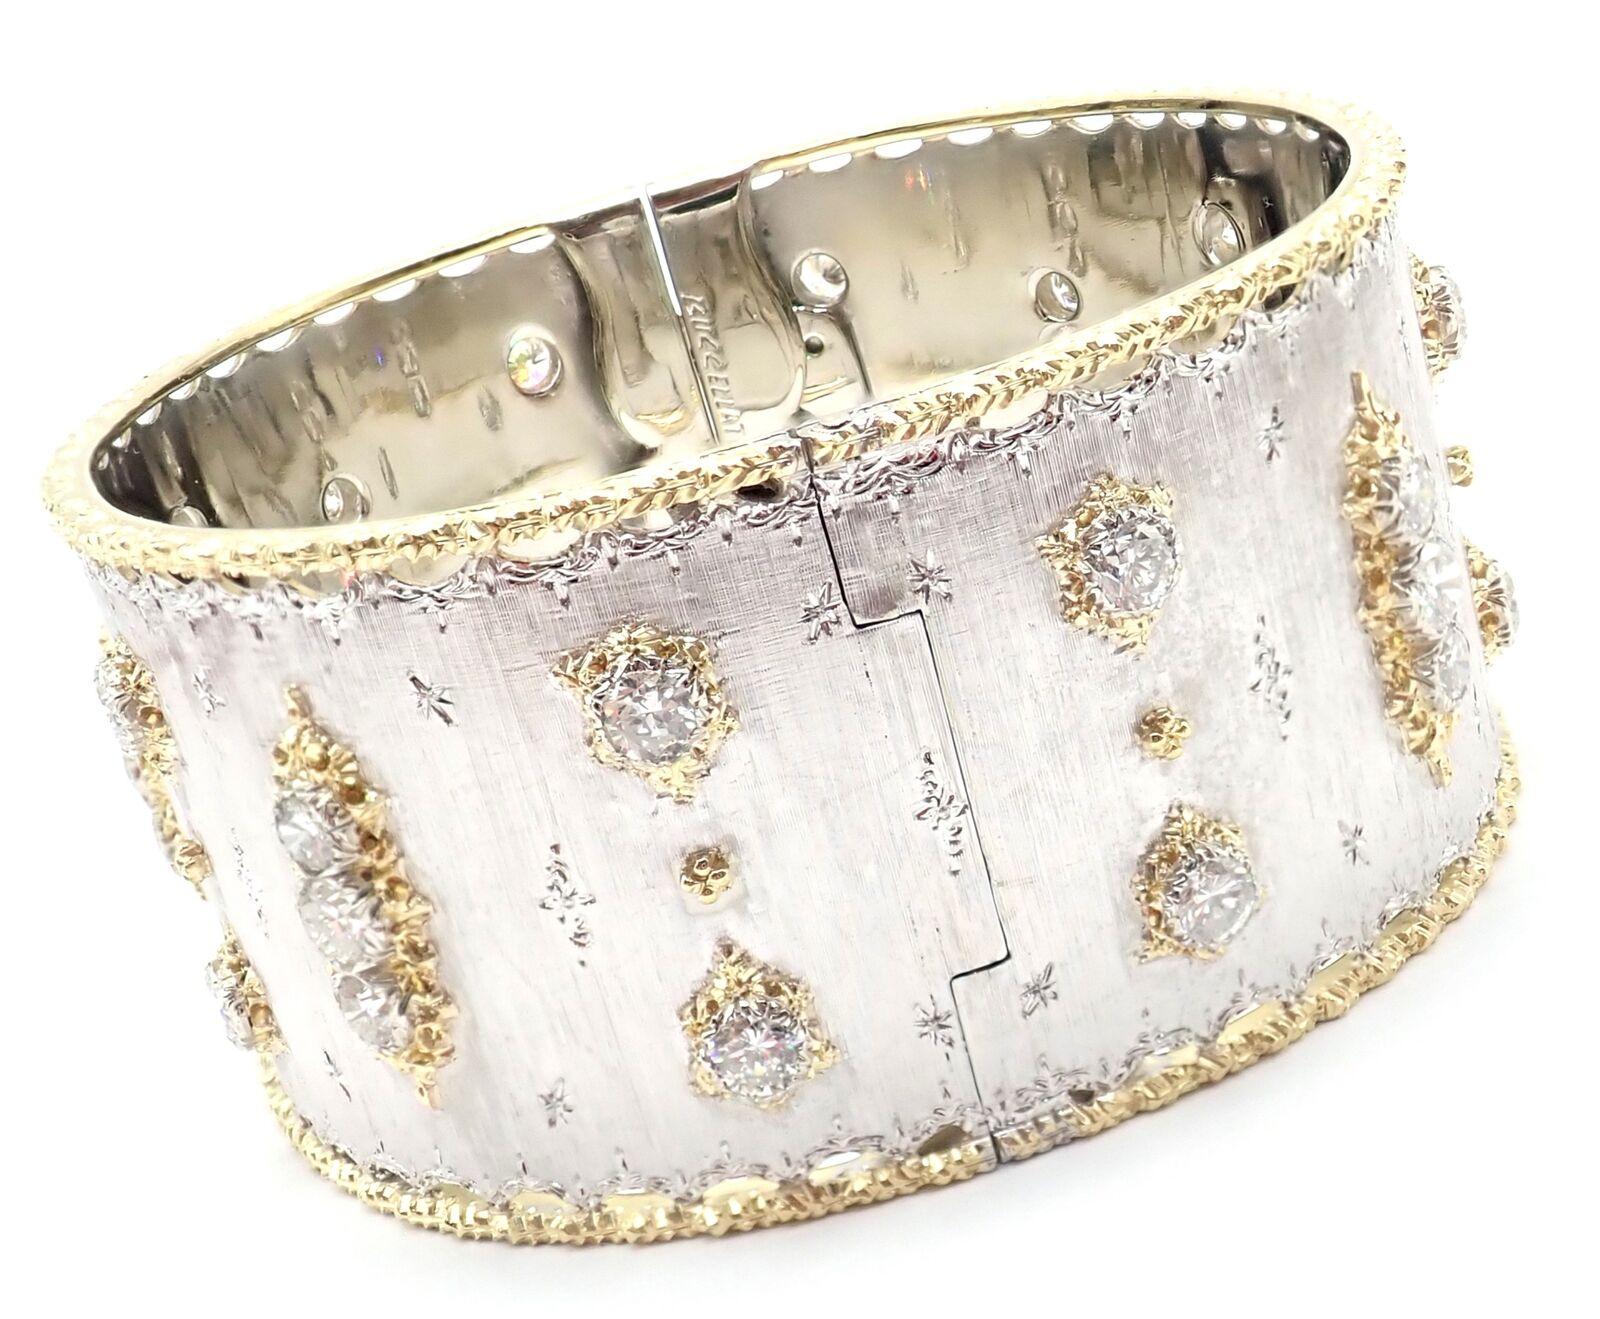 Buccellati Diamond White And Yellow Gold Bangle Bracelet In Excellent Condition For Sale In Holland, PA